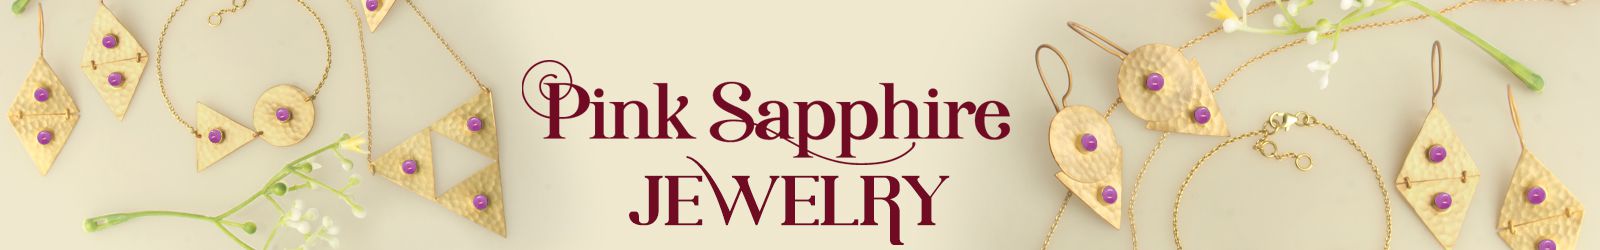 Silver Pink Sapphire Jewelry Wholesale Supplier